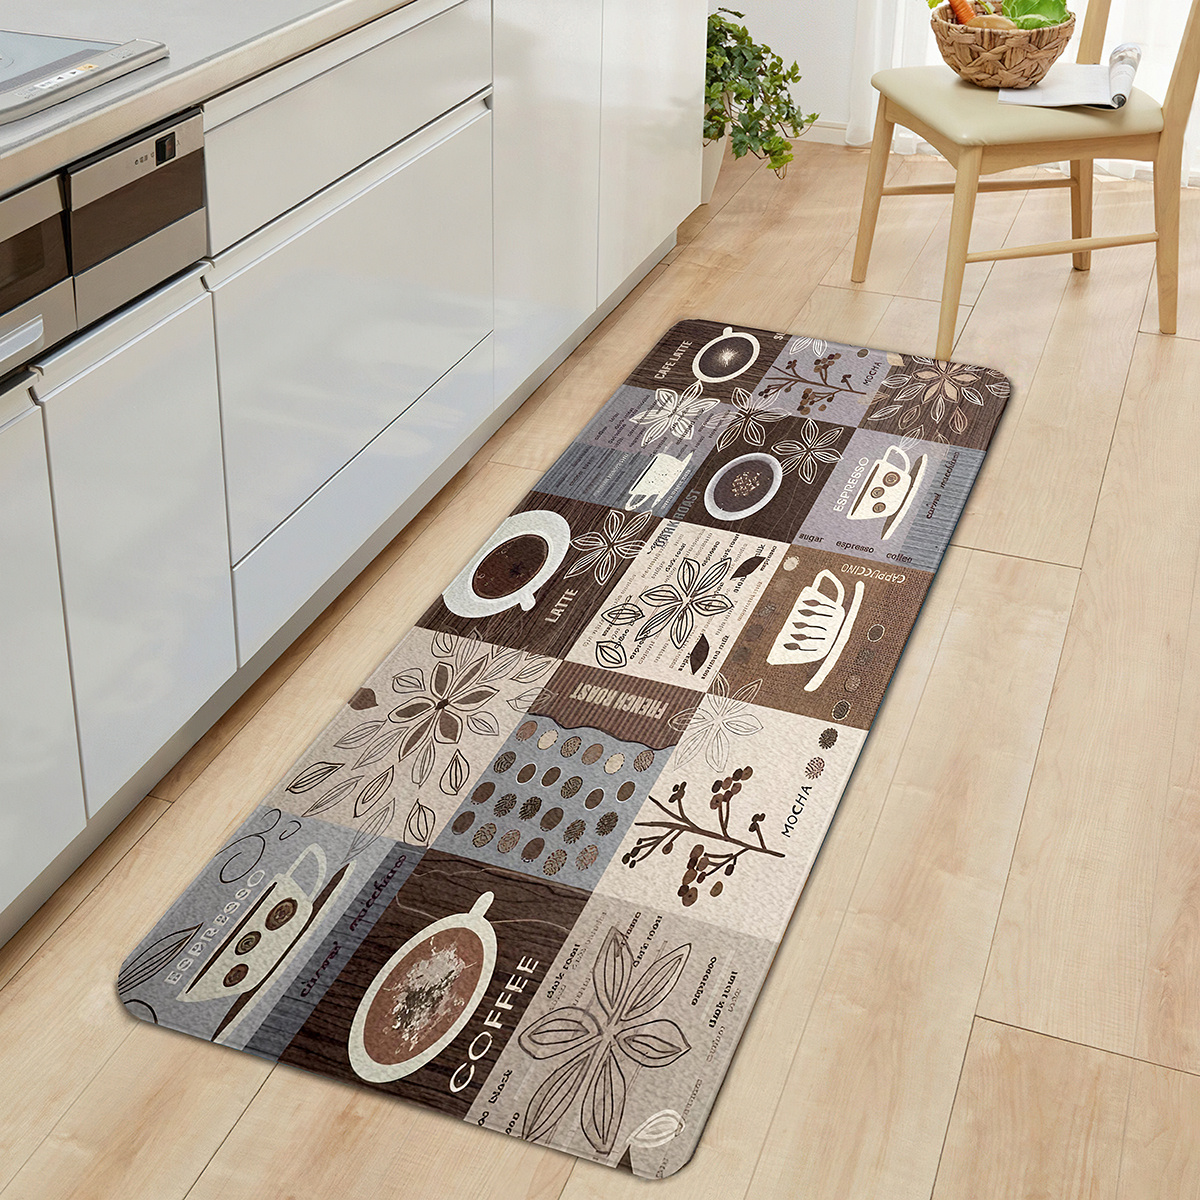 Boho Anti Fatigue Kitchen Rugs, Vintage Absorbent Non Slip Cushioned Rugs,  Stain Resistant Waterproof Floor Mat, Comfort Standing Mats, Living Room  Bedroom Bathroom Kitchen Sink Laundry Office Area Rugs Runner, Home Decor 